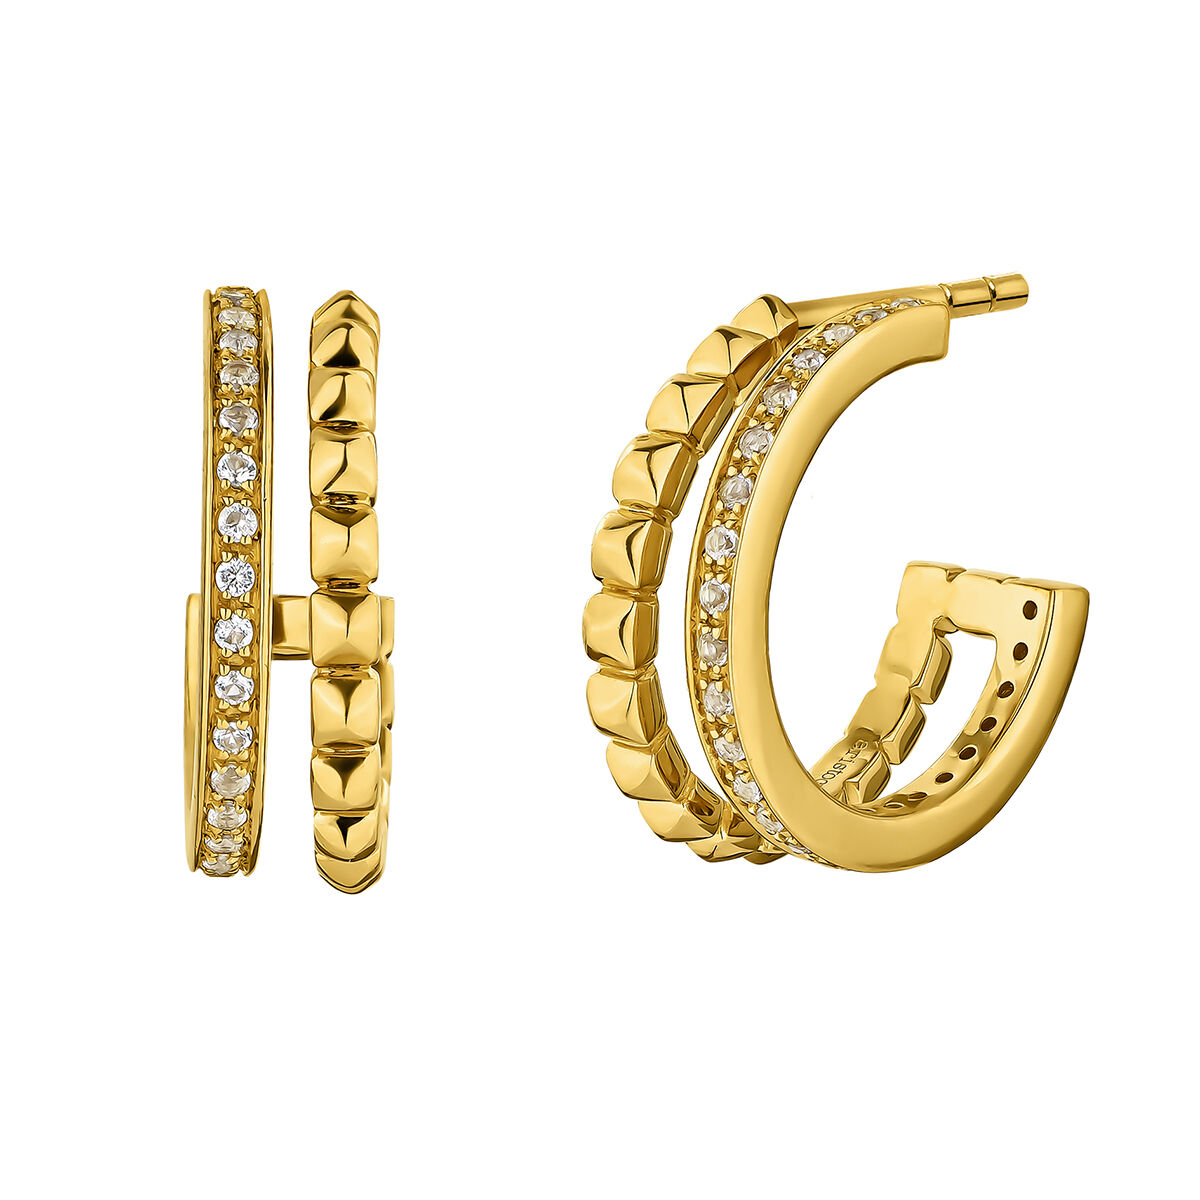 Medium double hoop earrings in 18k yellow gold-plated silver with raised detail and white topazes, J04911-02-WT, hi-res